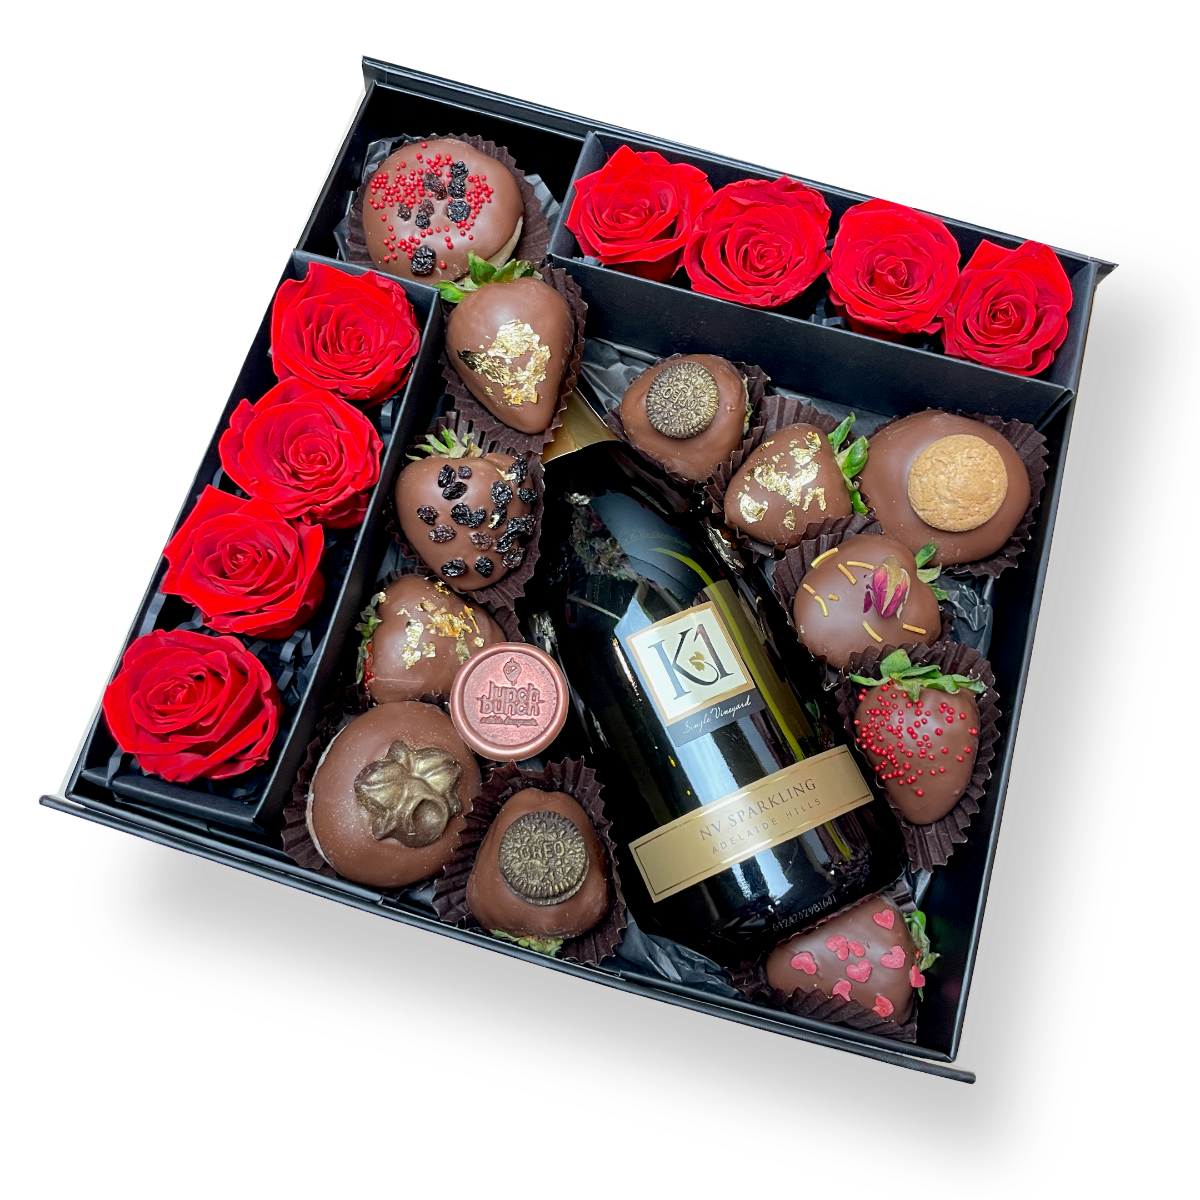 preserved Roses, Infinity Roses, Eternal Roses, Chocolate Strawberries Box, K1 Sparkling, Same day Delivery Gift Hamper, Chocolate Flowers Gift